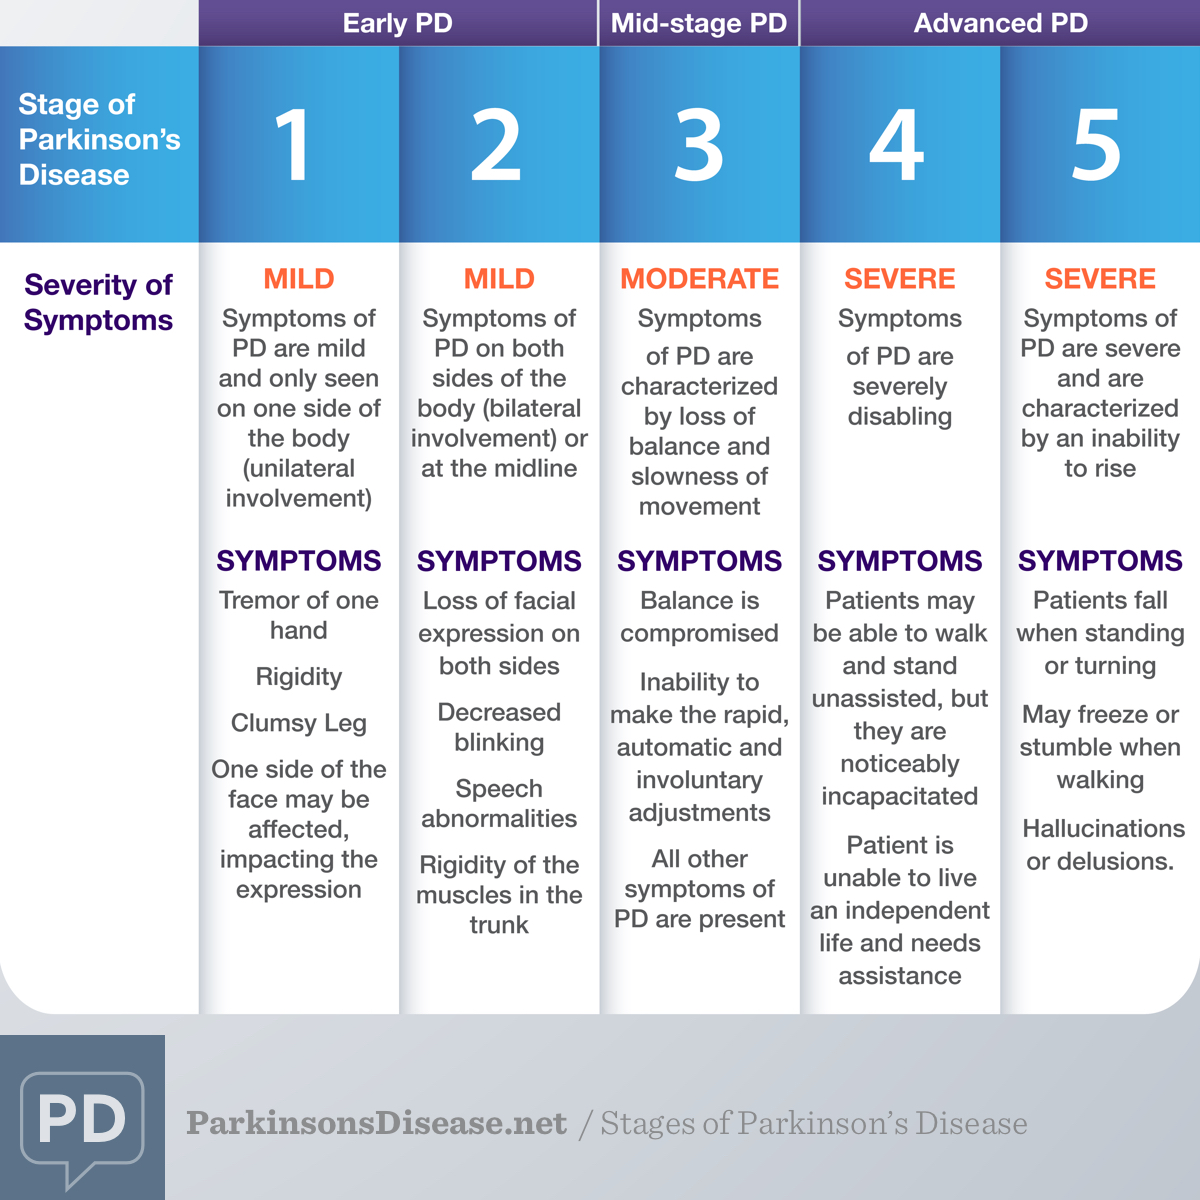 Summary of symptoms associated with each stage of Parkinson's disease